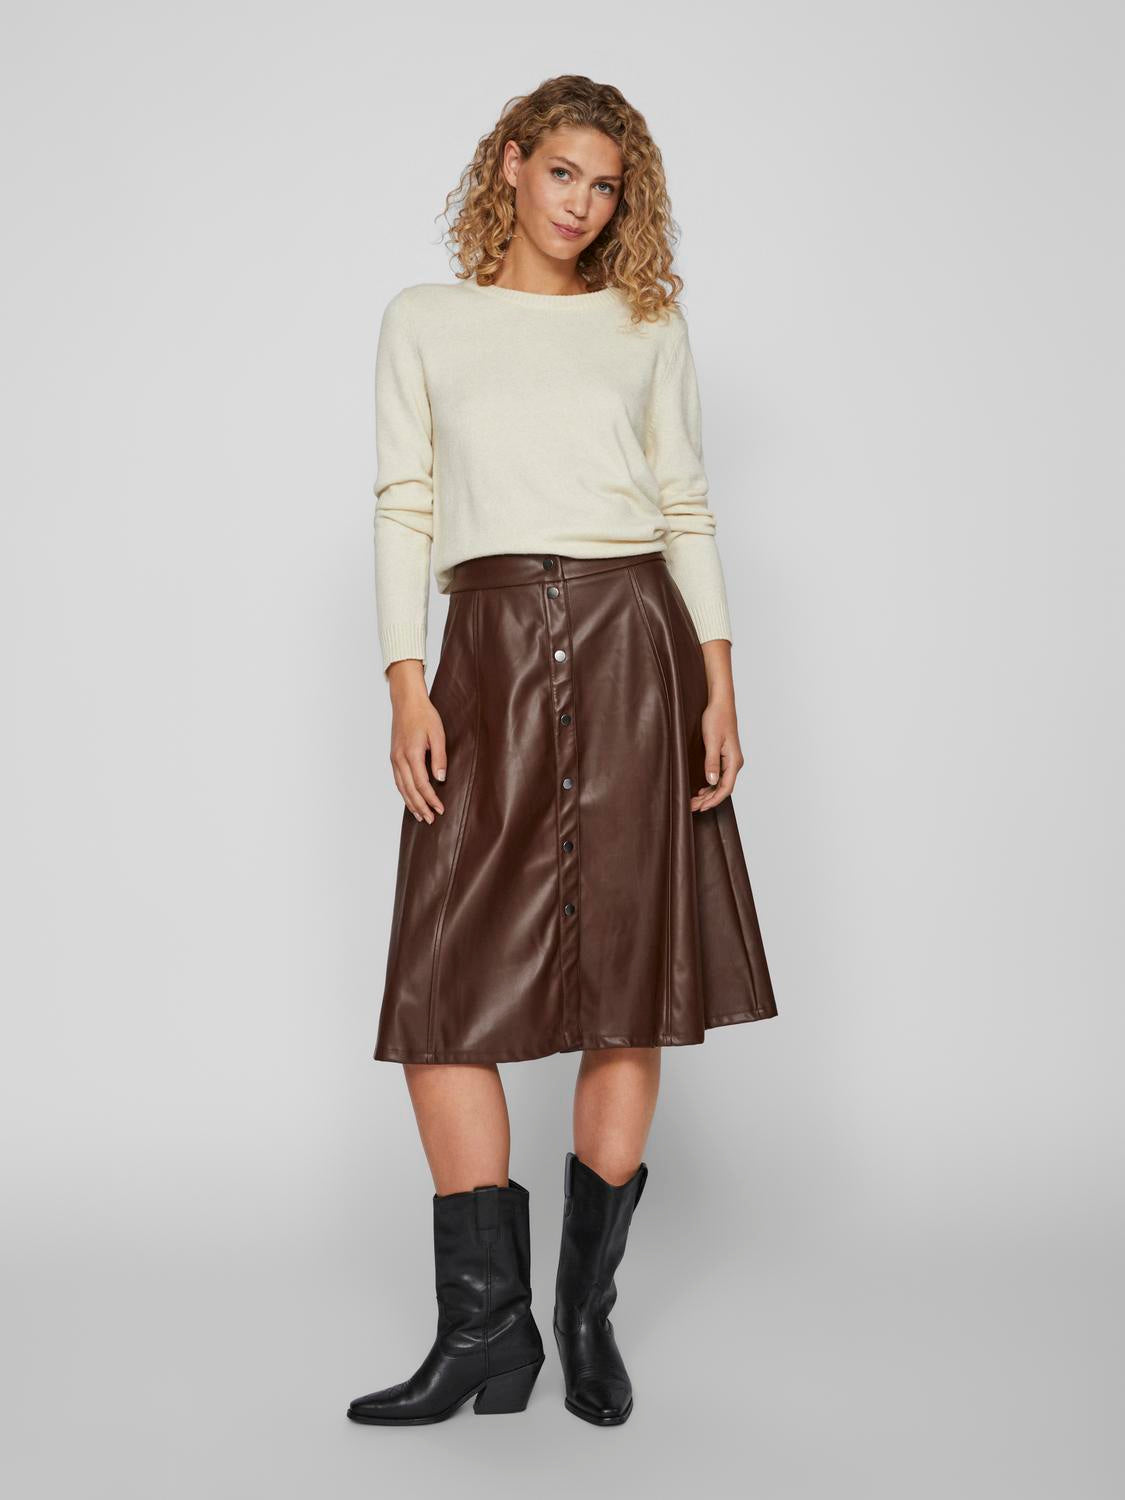 VIBROWN Skirt - Shaved Chocolate